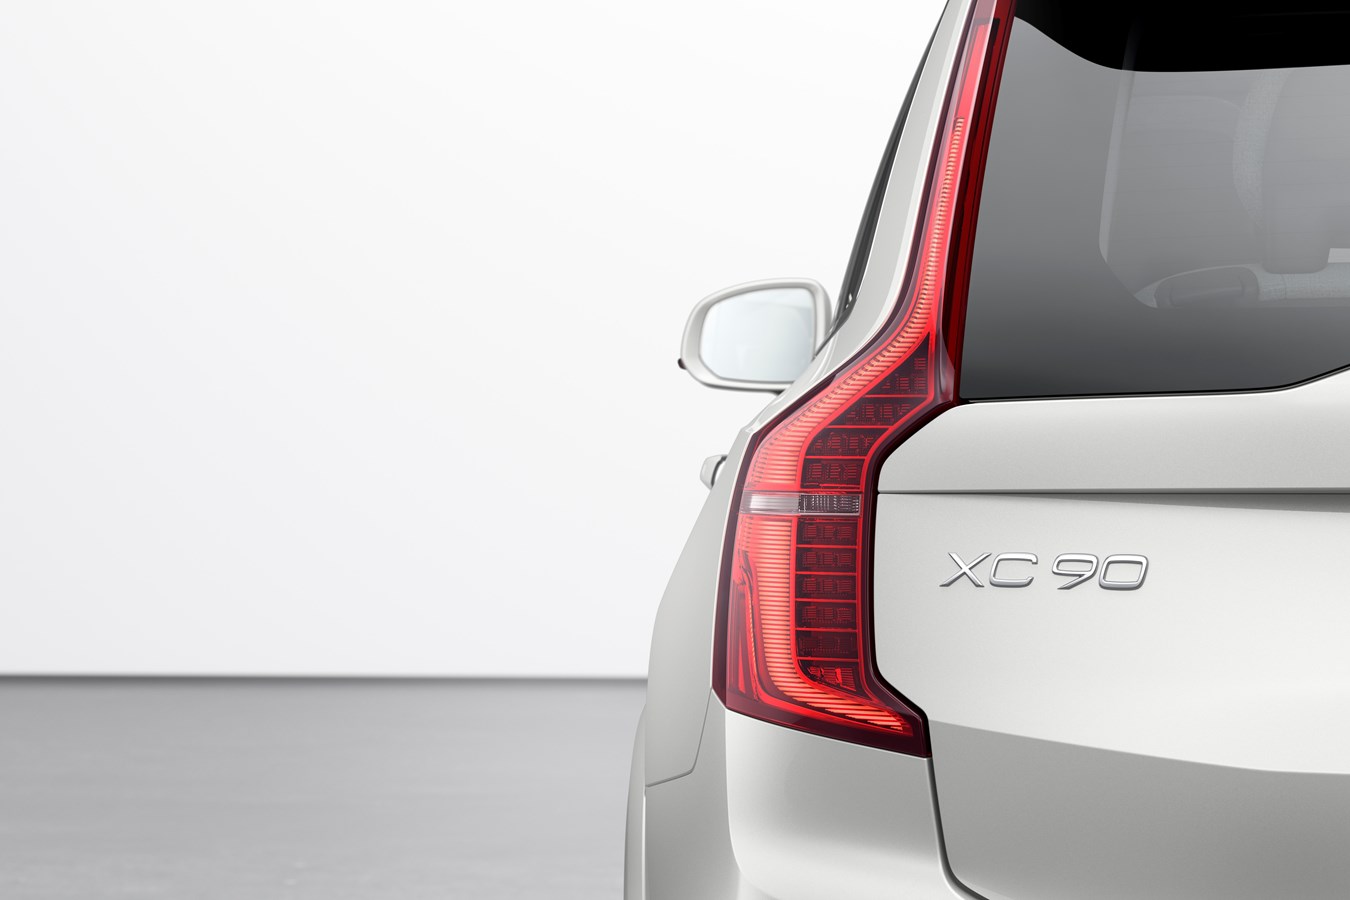 The refreshed Volvo XC90 Inscription T8 Twin Engine in Birch Light Metallic